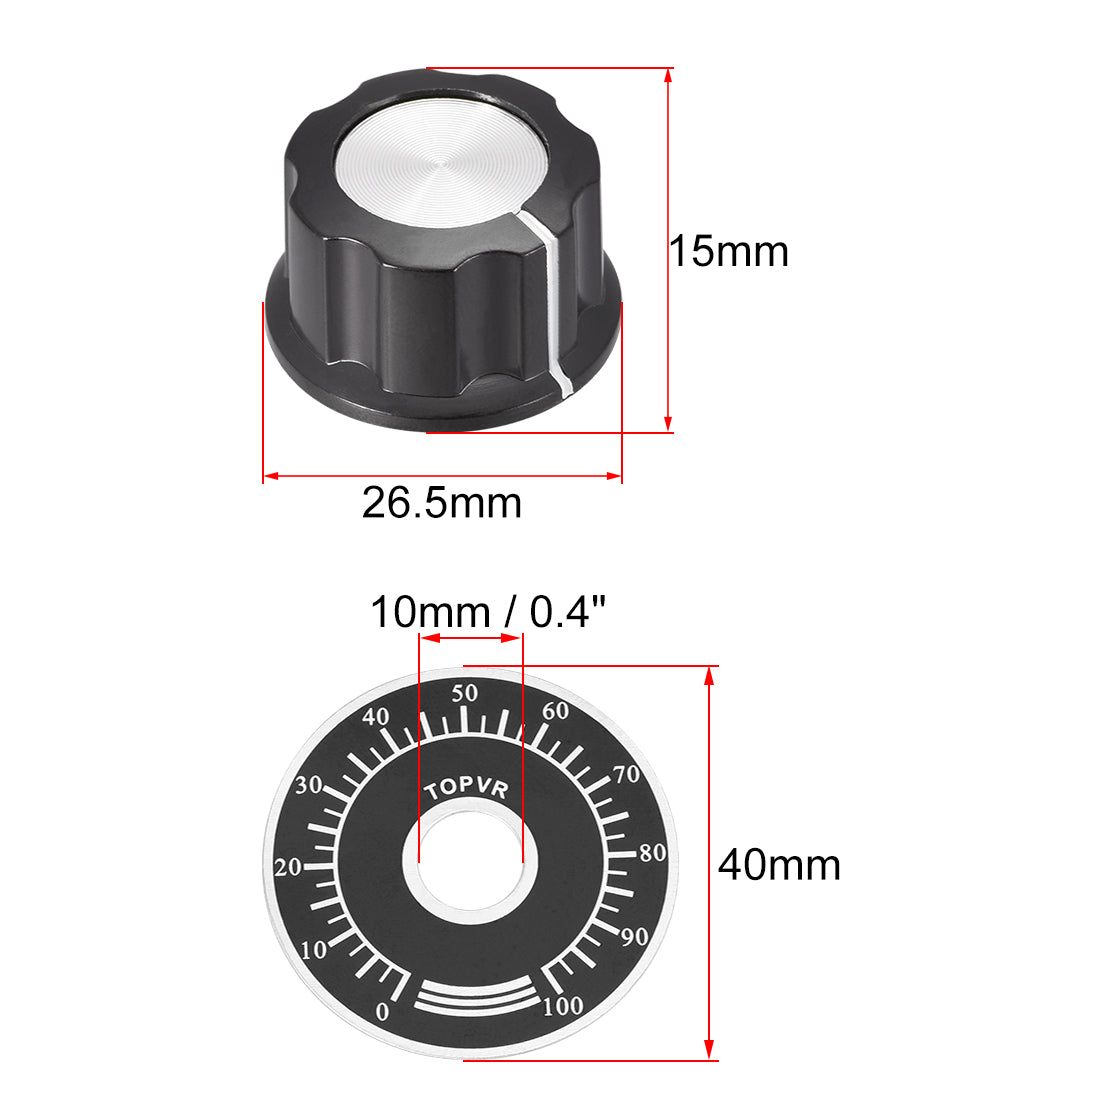 uxcell Uxcell Plastic Potentiometer Rotary Knob 6mm Insert Shaft with 40mm 0-100 Dial Face Plate 1pcs